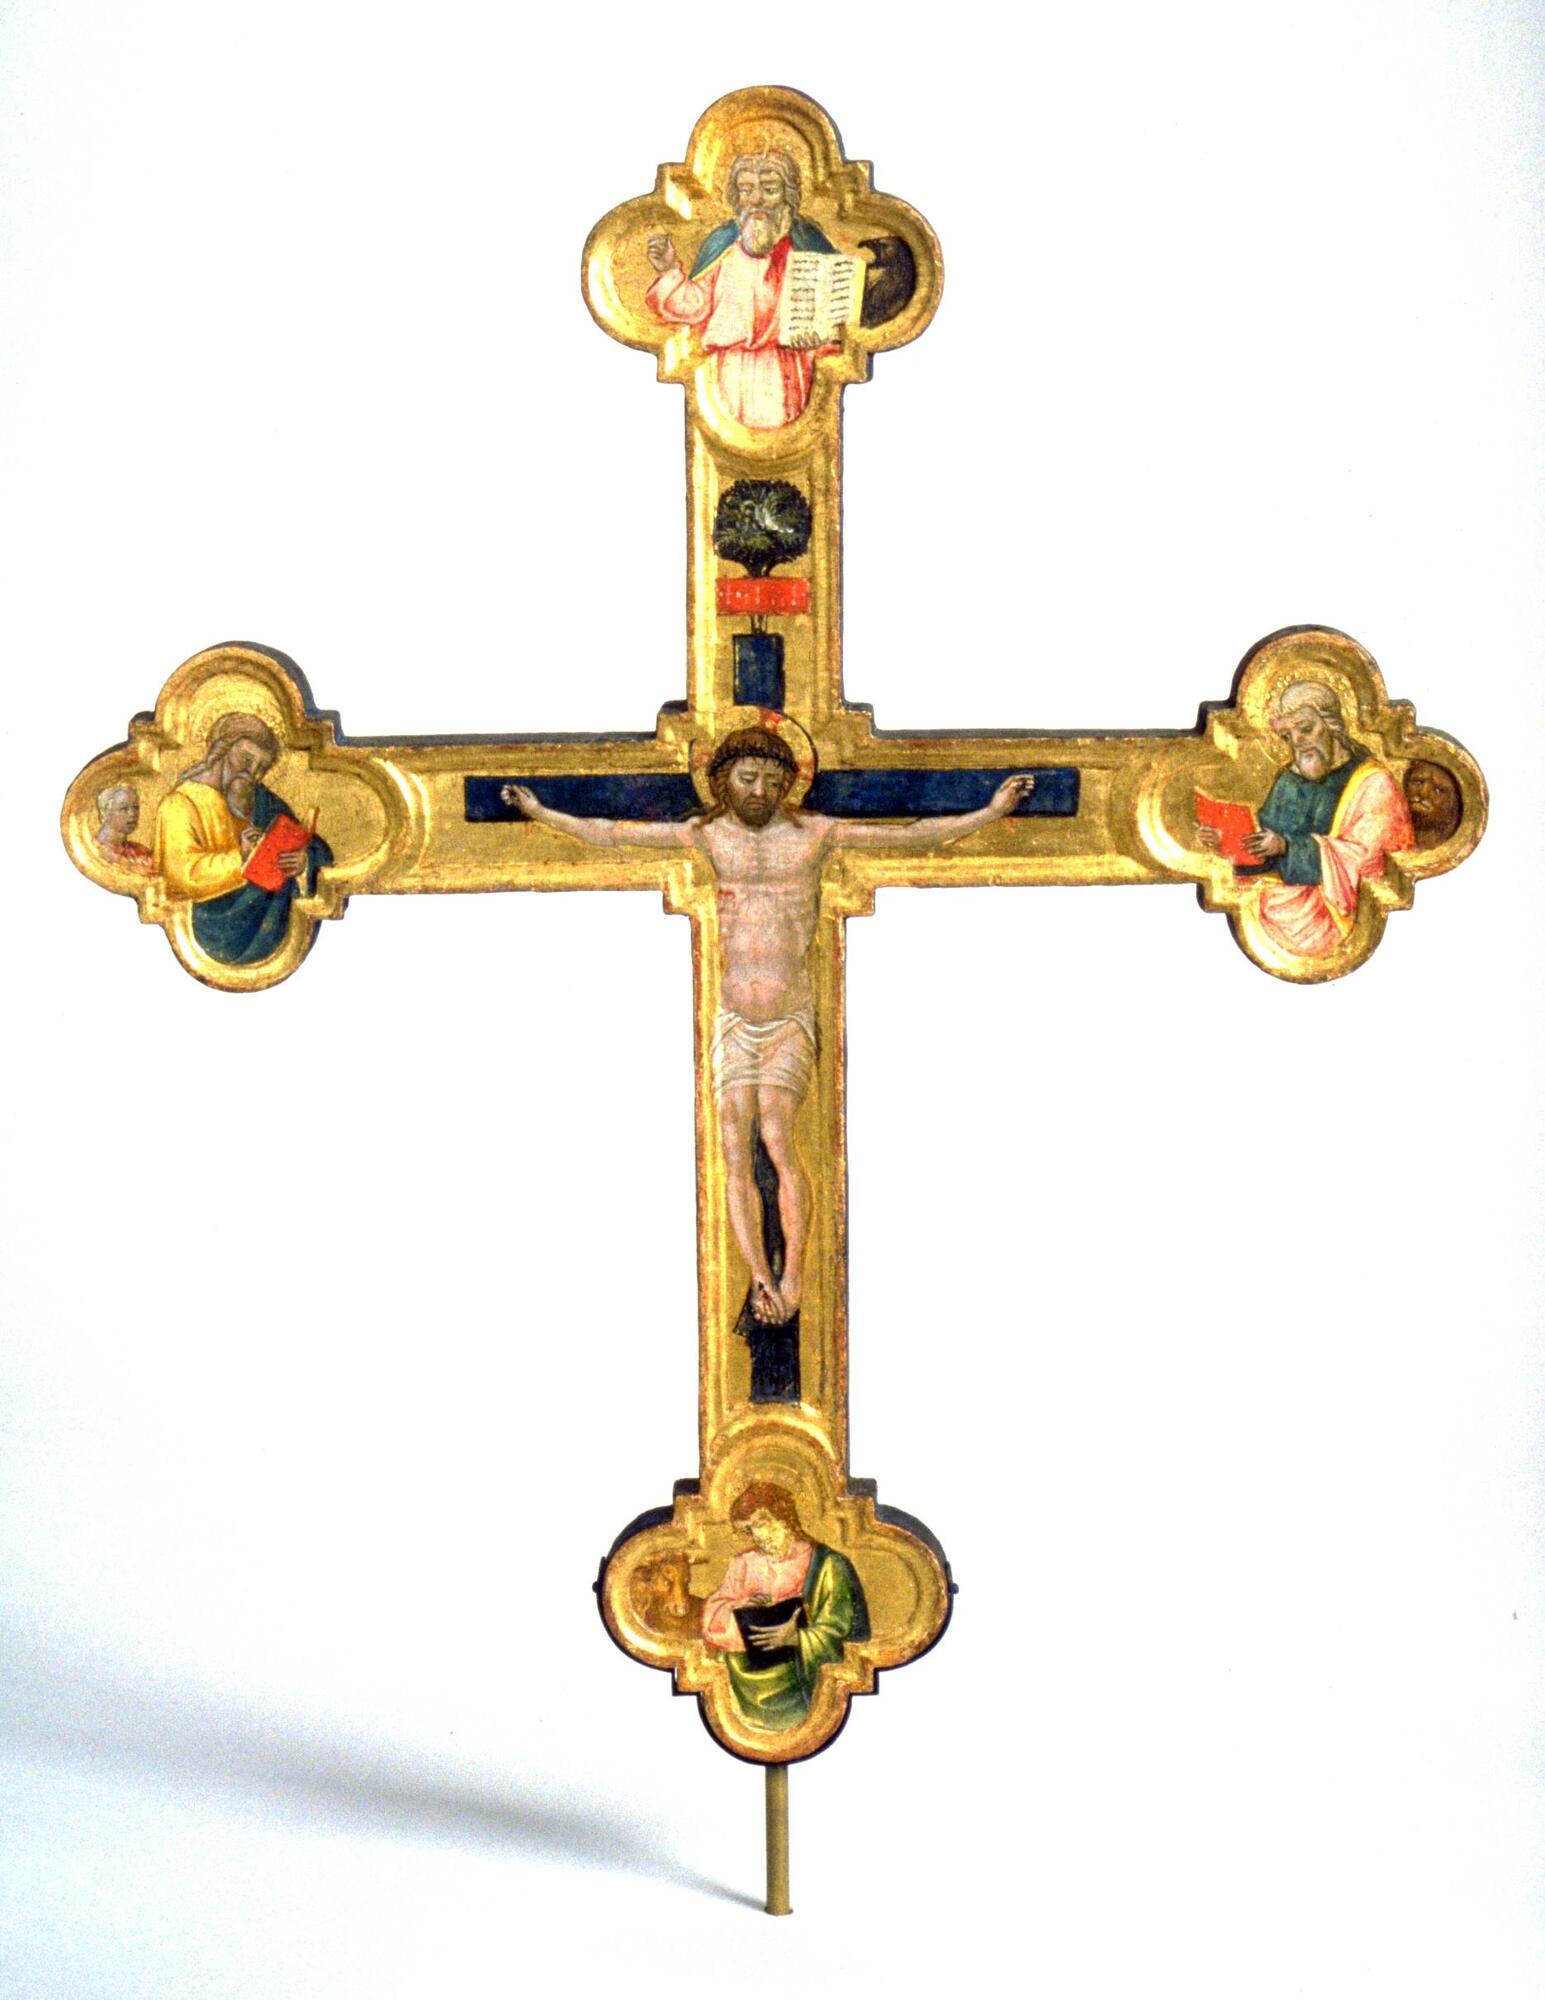 The arms of the cross end in quatrefoil-shaped terminals. The front (obverse) is gilded and features a molding along the edges. The back (reverse) has a deep azurite blue ground and a gilded band punched with tiny rosettes that runs along the border.